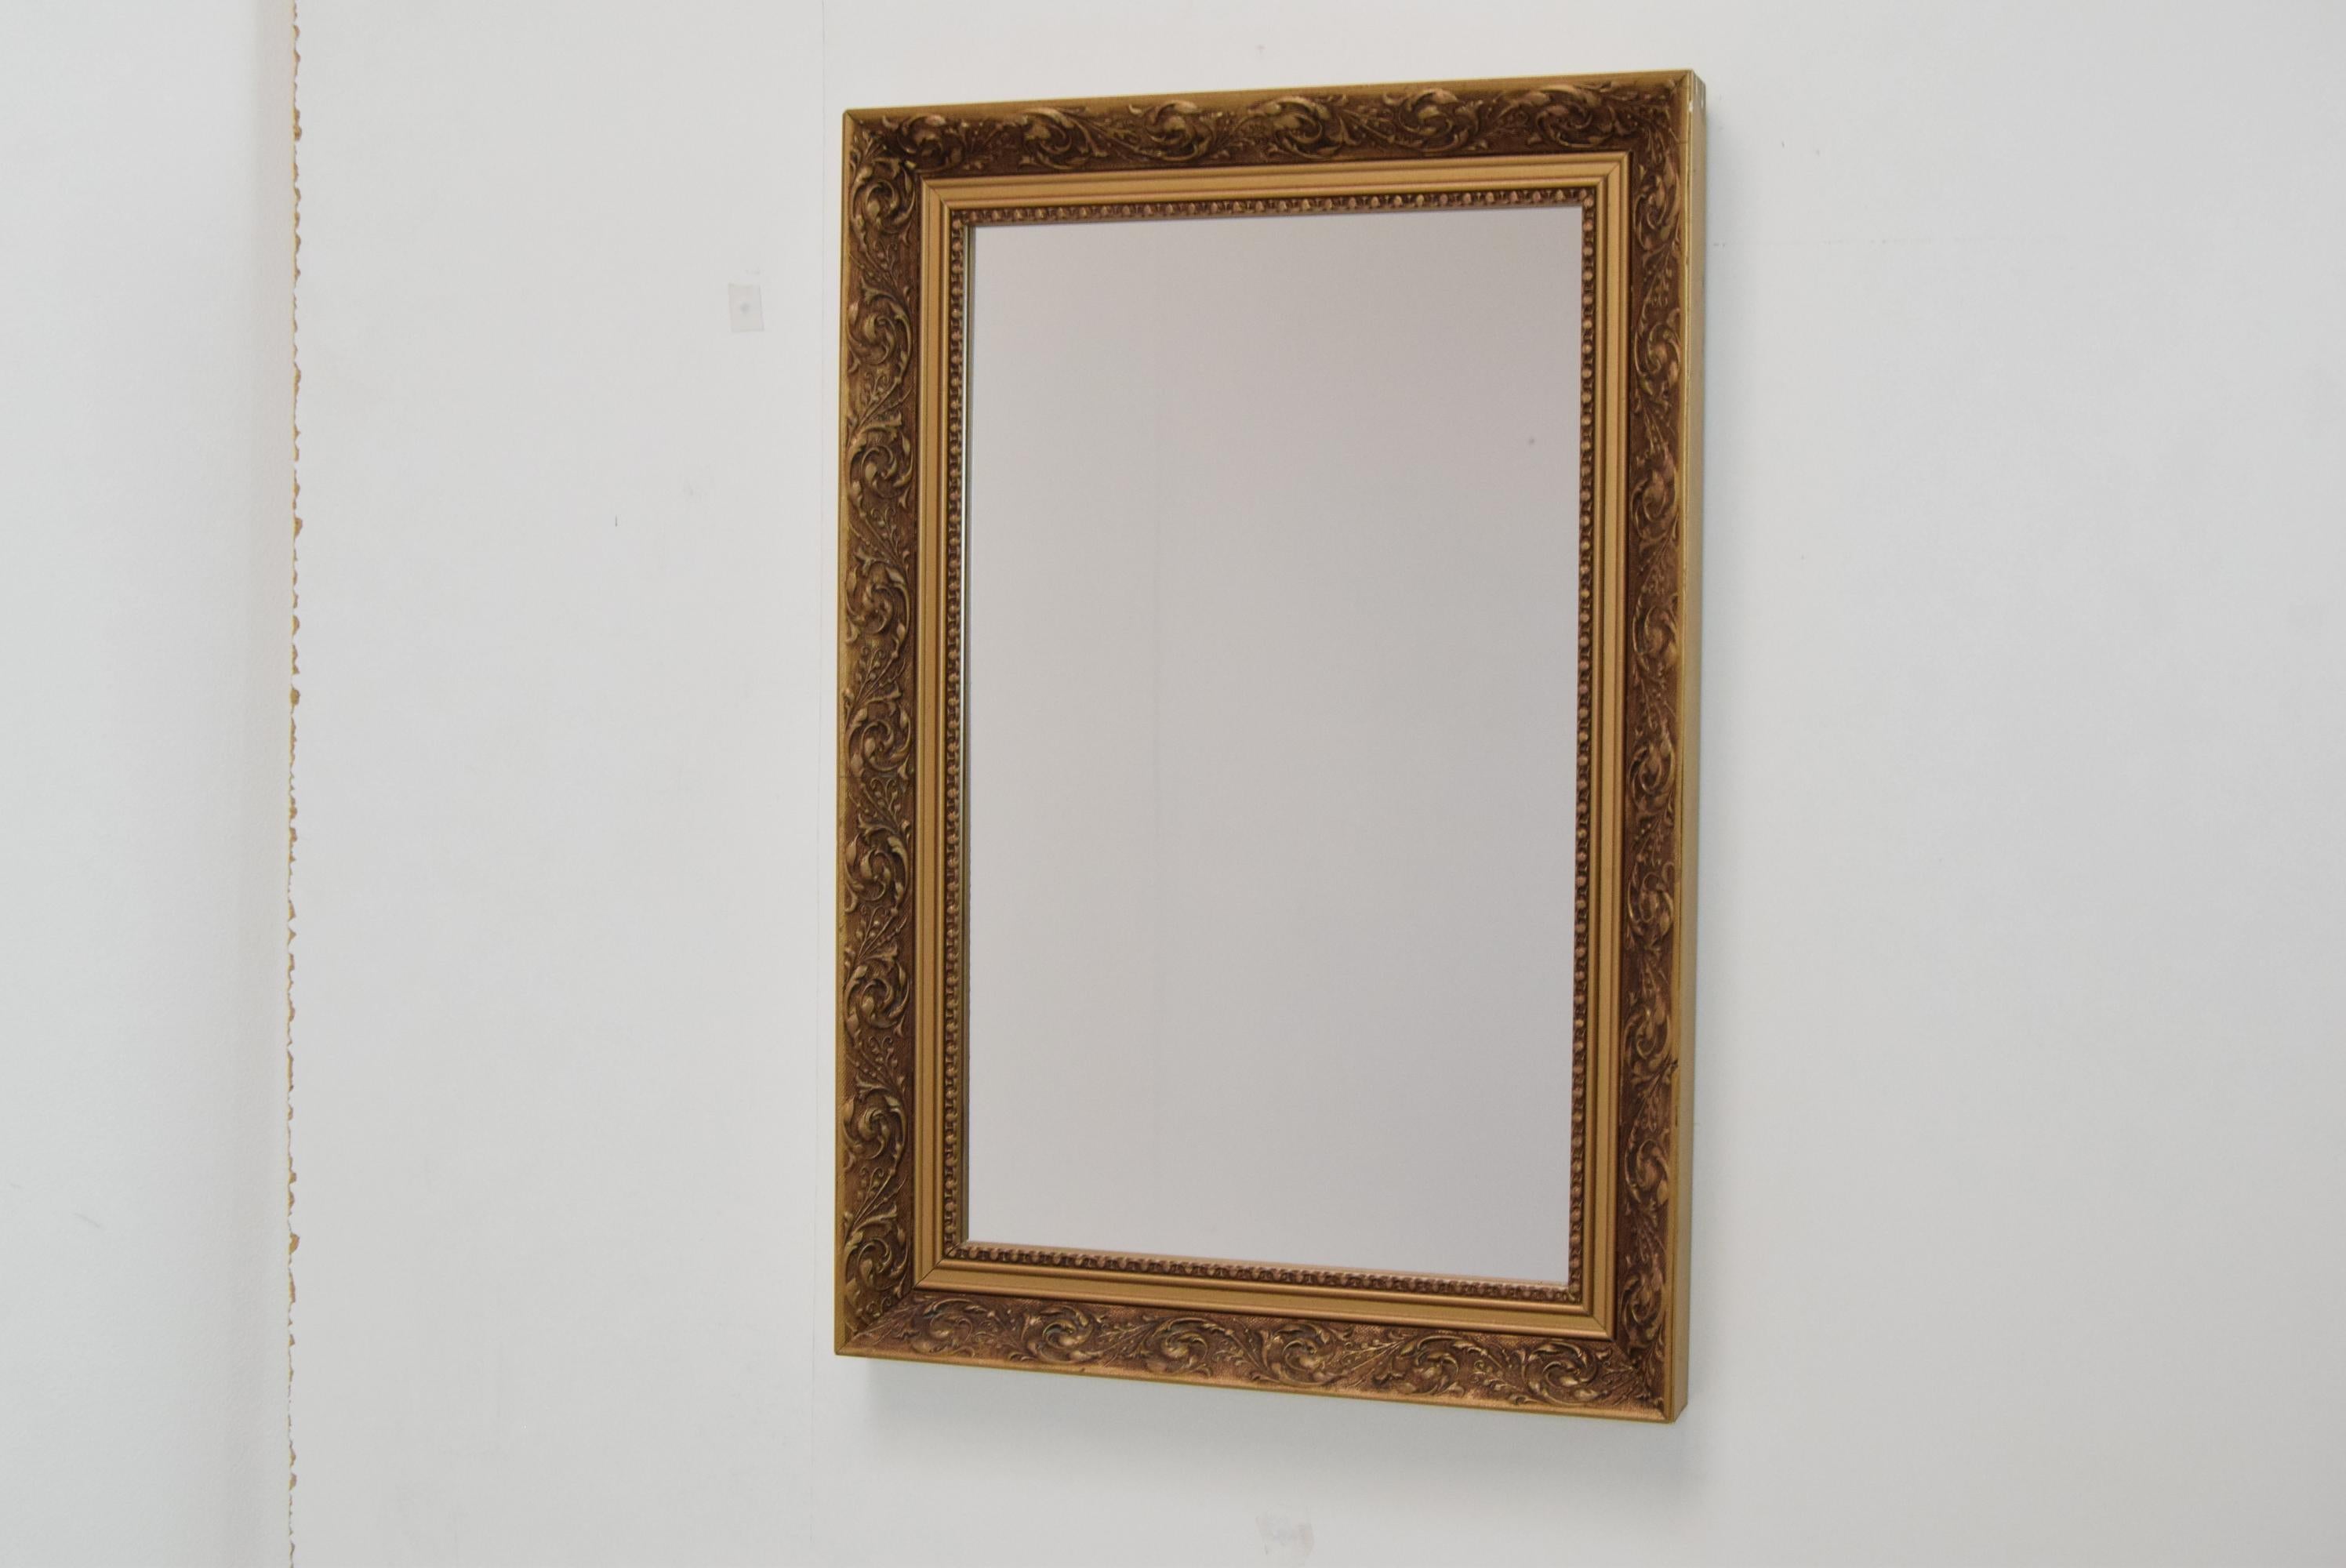 Made in Czechoslovakia
Made of Mirror,Wood,plaster
Re-polished
Original condition.